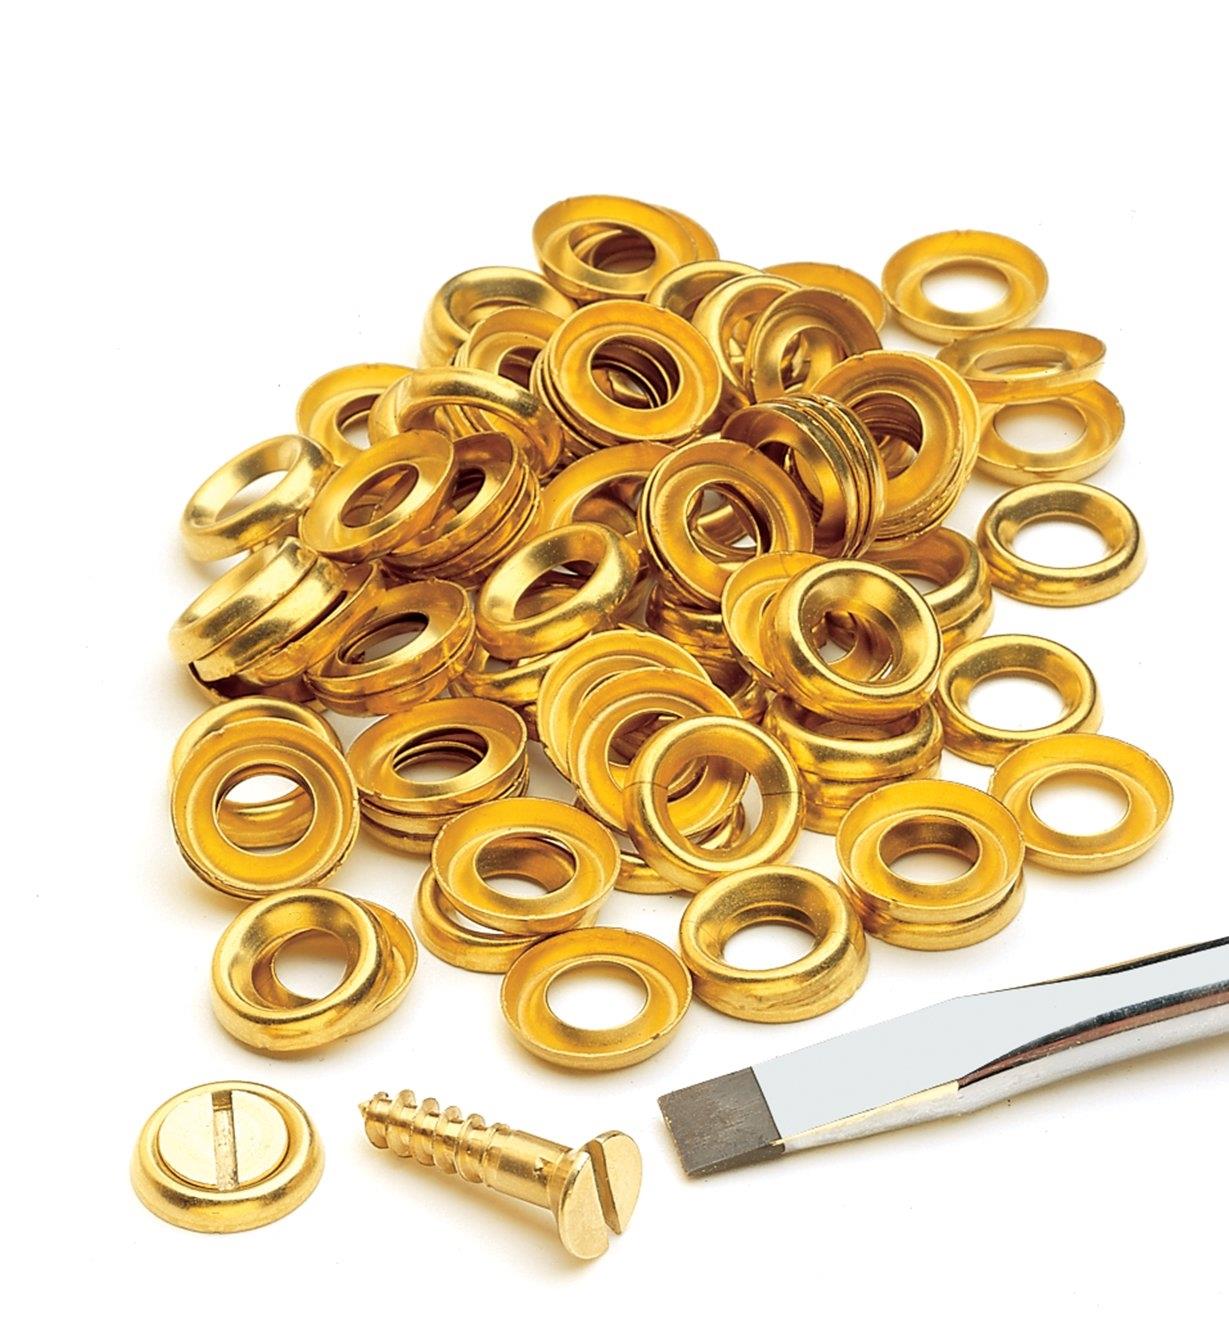 A pile of Brass Finishing/Cup Washers displayed with a screw and a screwdriver